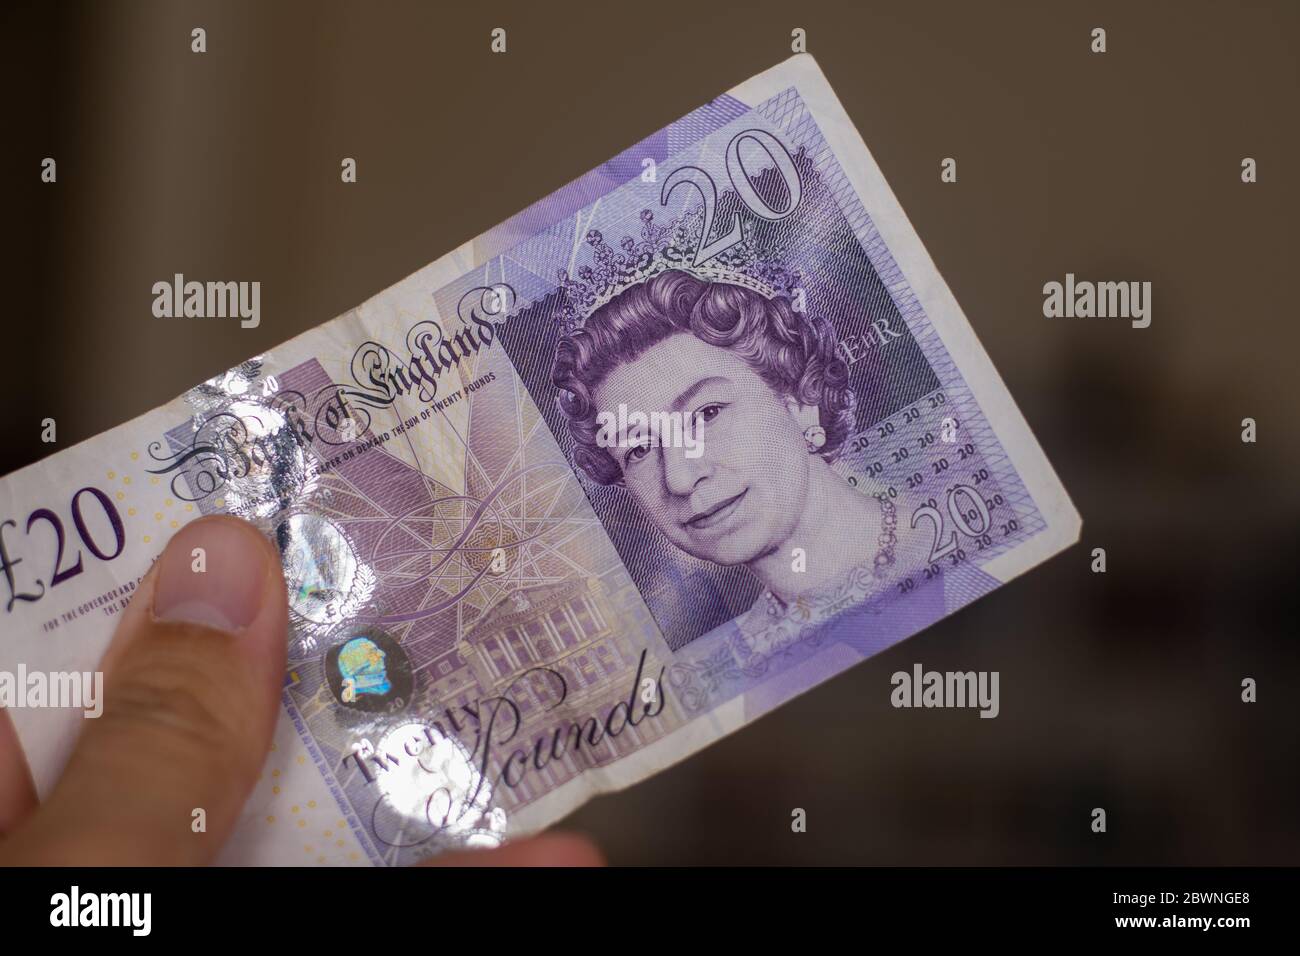 Persons hand giving the Currency of the England in the United Kingdom - One purple twenty pound note spread out on a brown background. Money exchange. Stock Photo